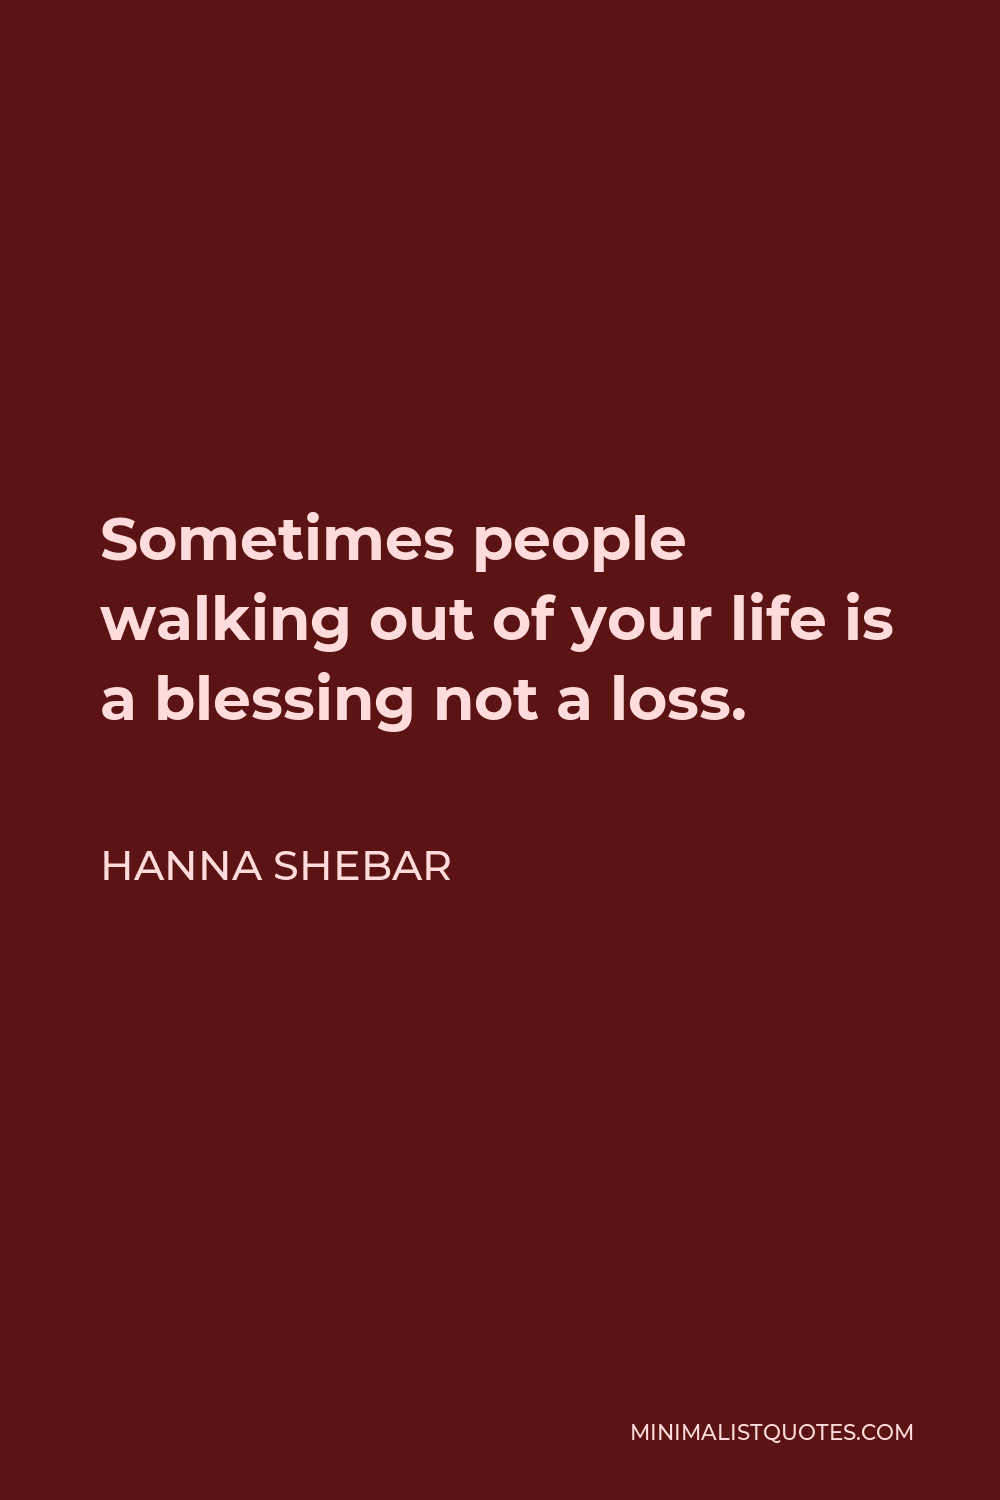 Hanna Shebar Quote - Sometimes people walking out of your life is a blessing not a loss.